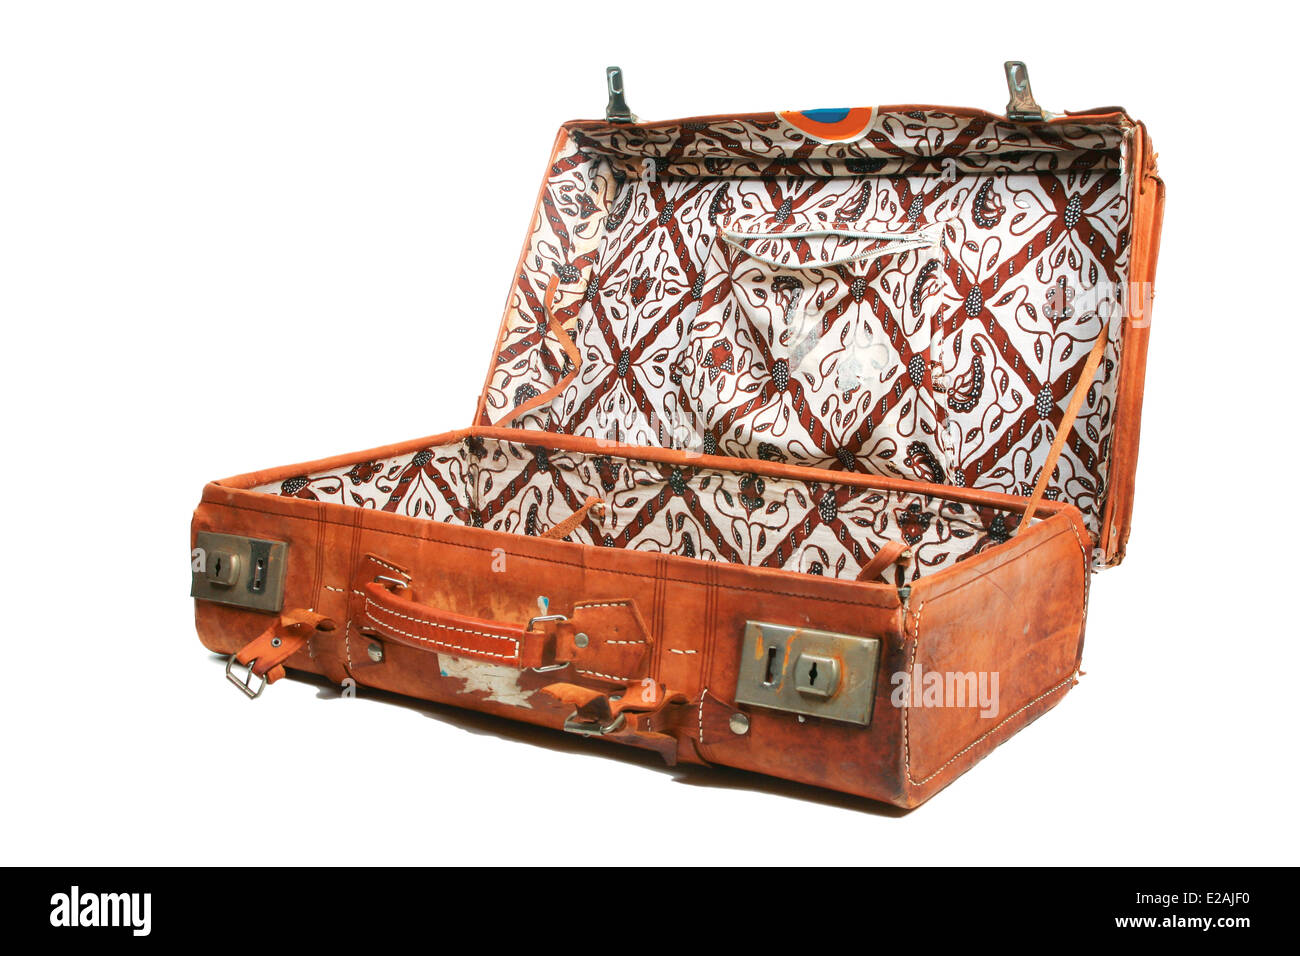 Open leather suitcase with batik cotton lining Stock Photo